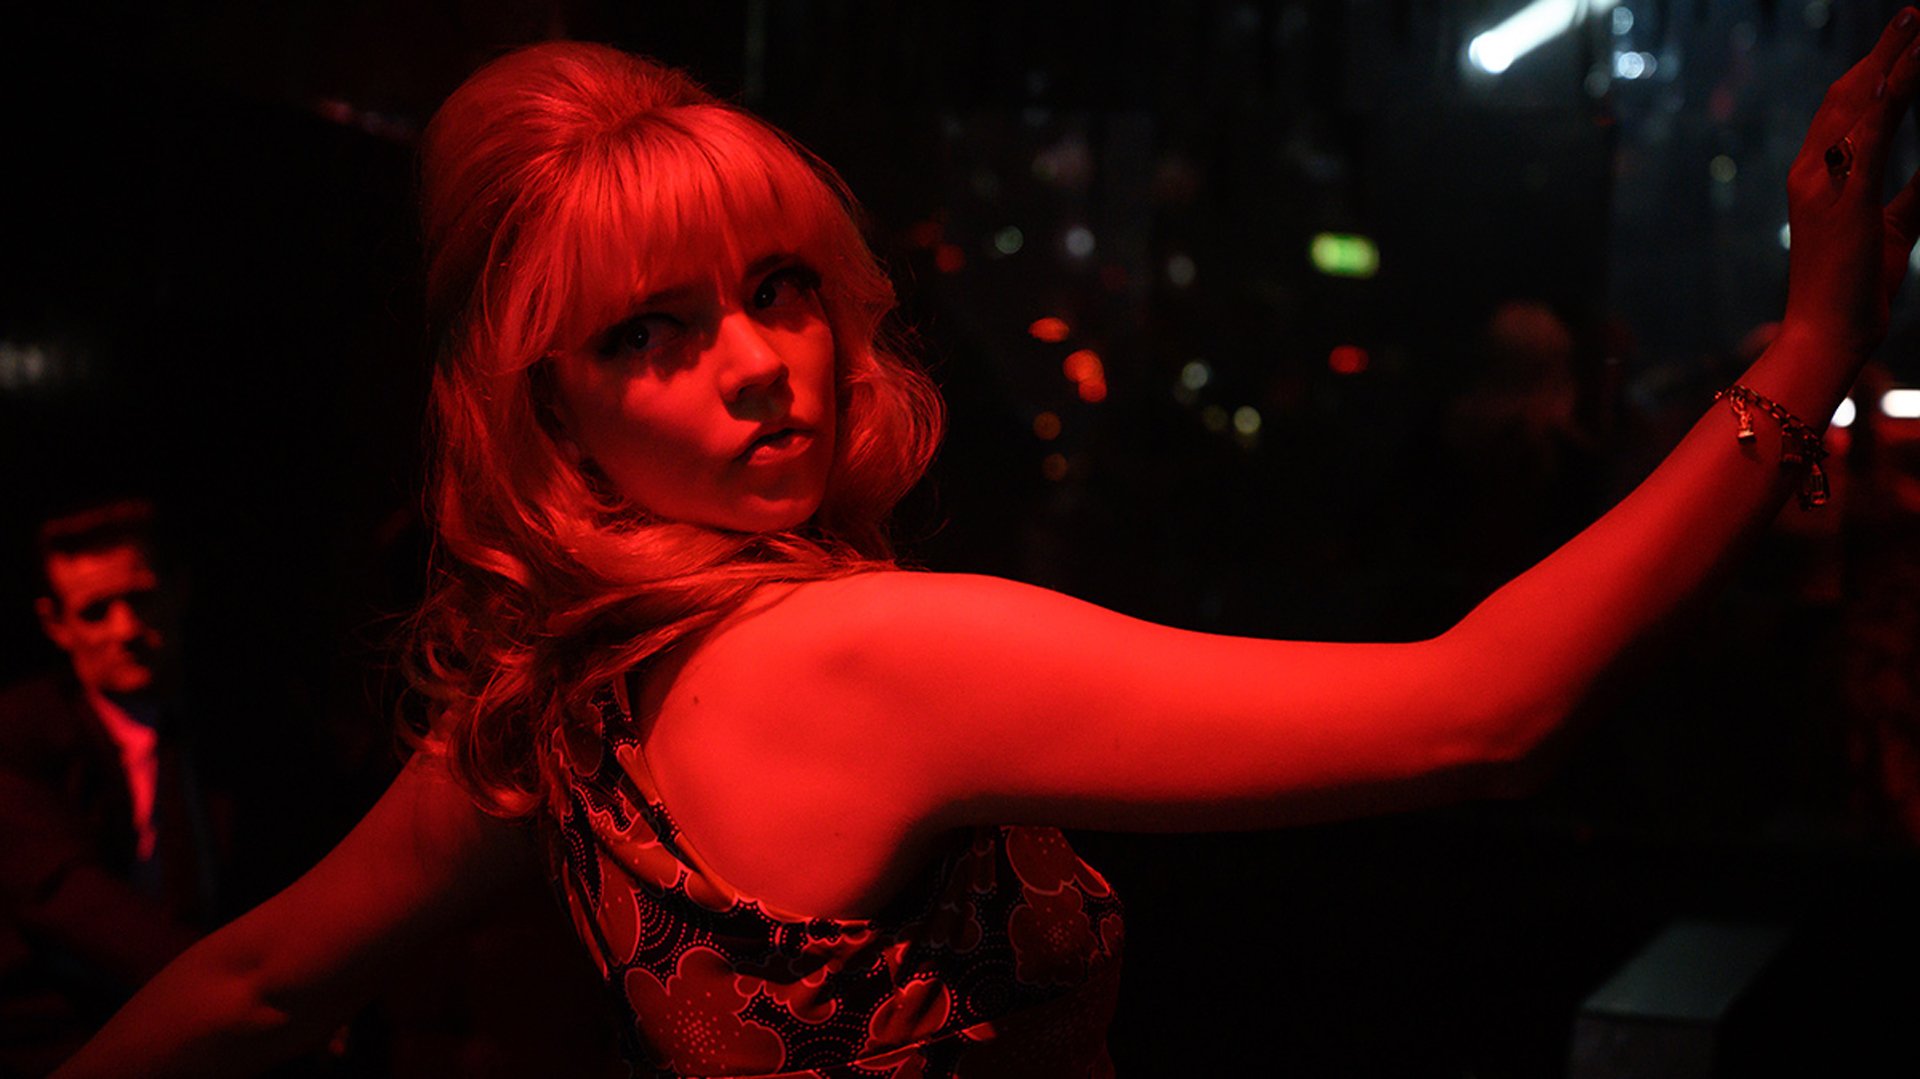 A young woman in 1960s dress dances beneath a red light.